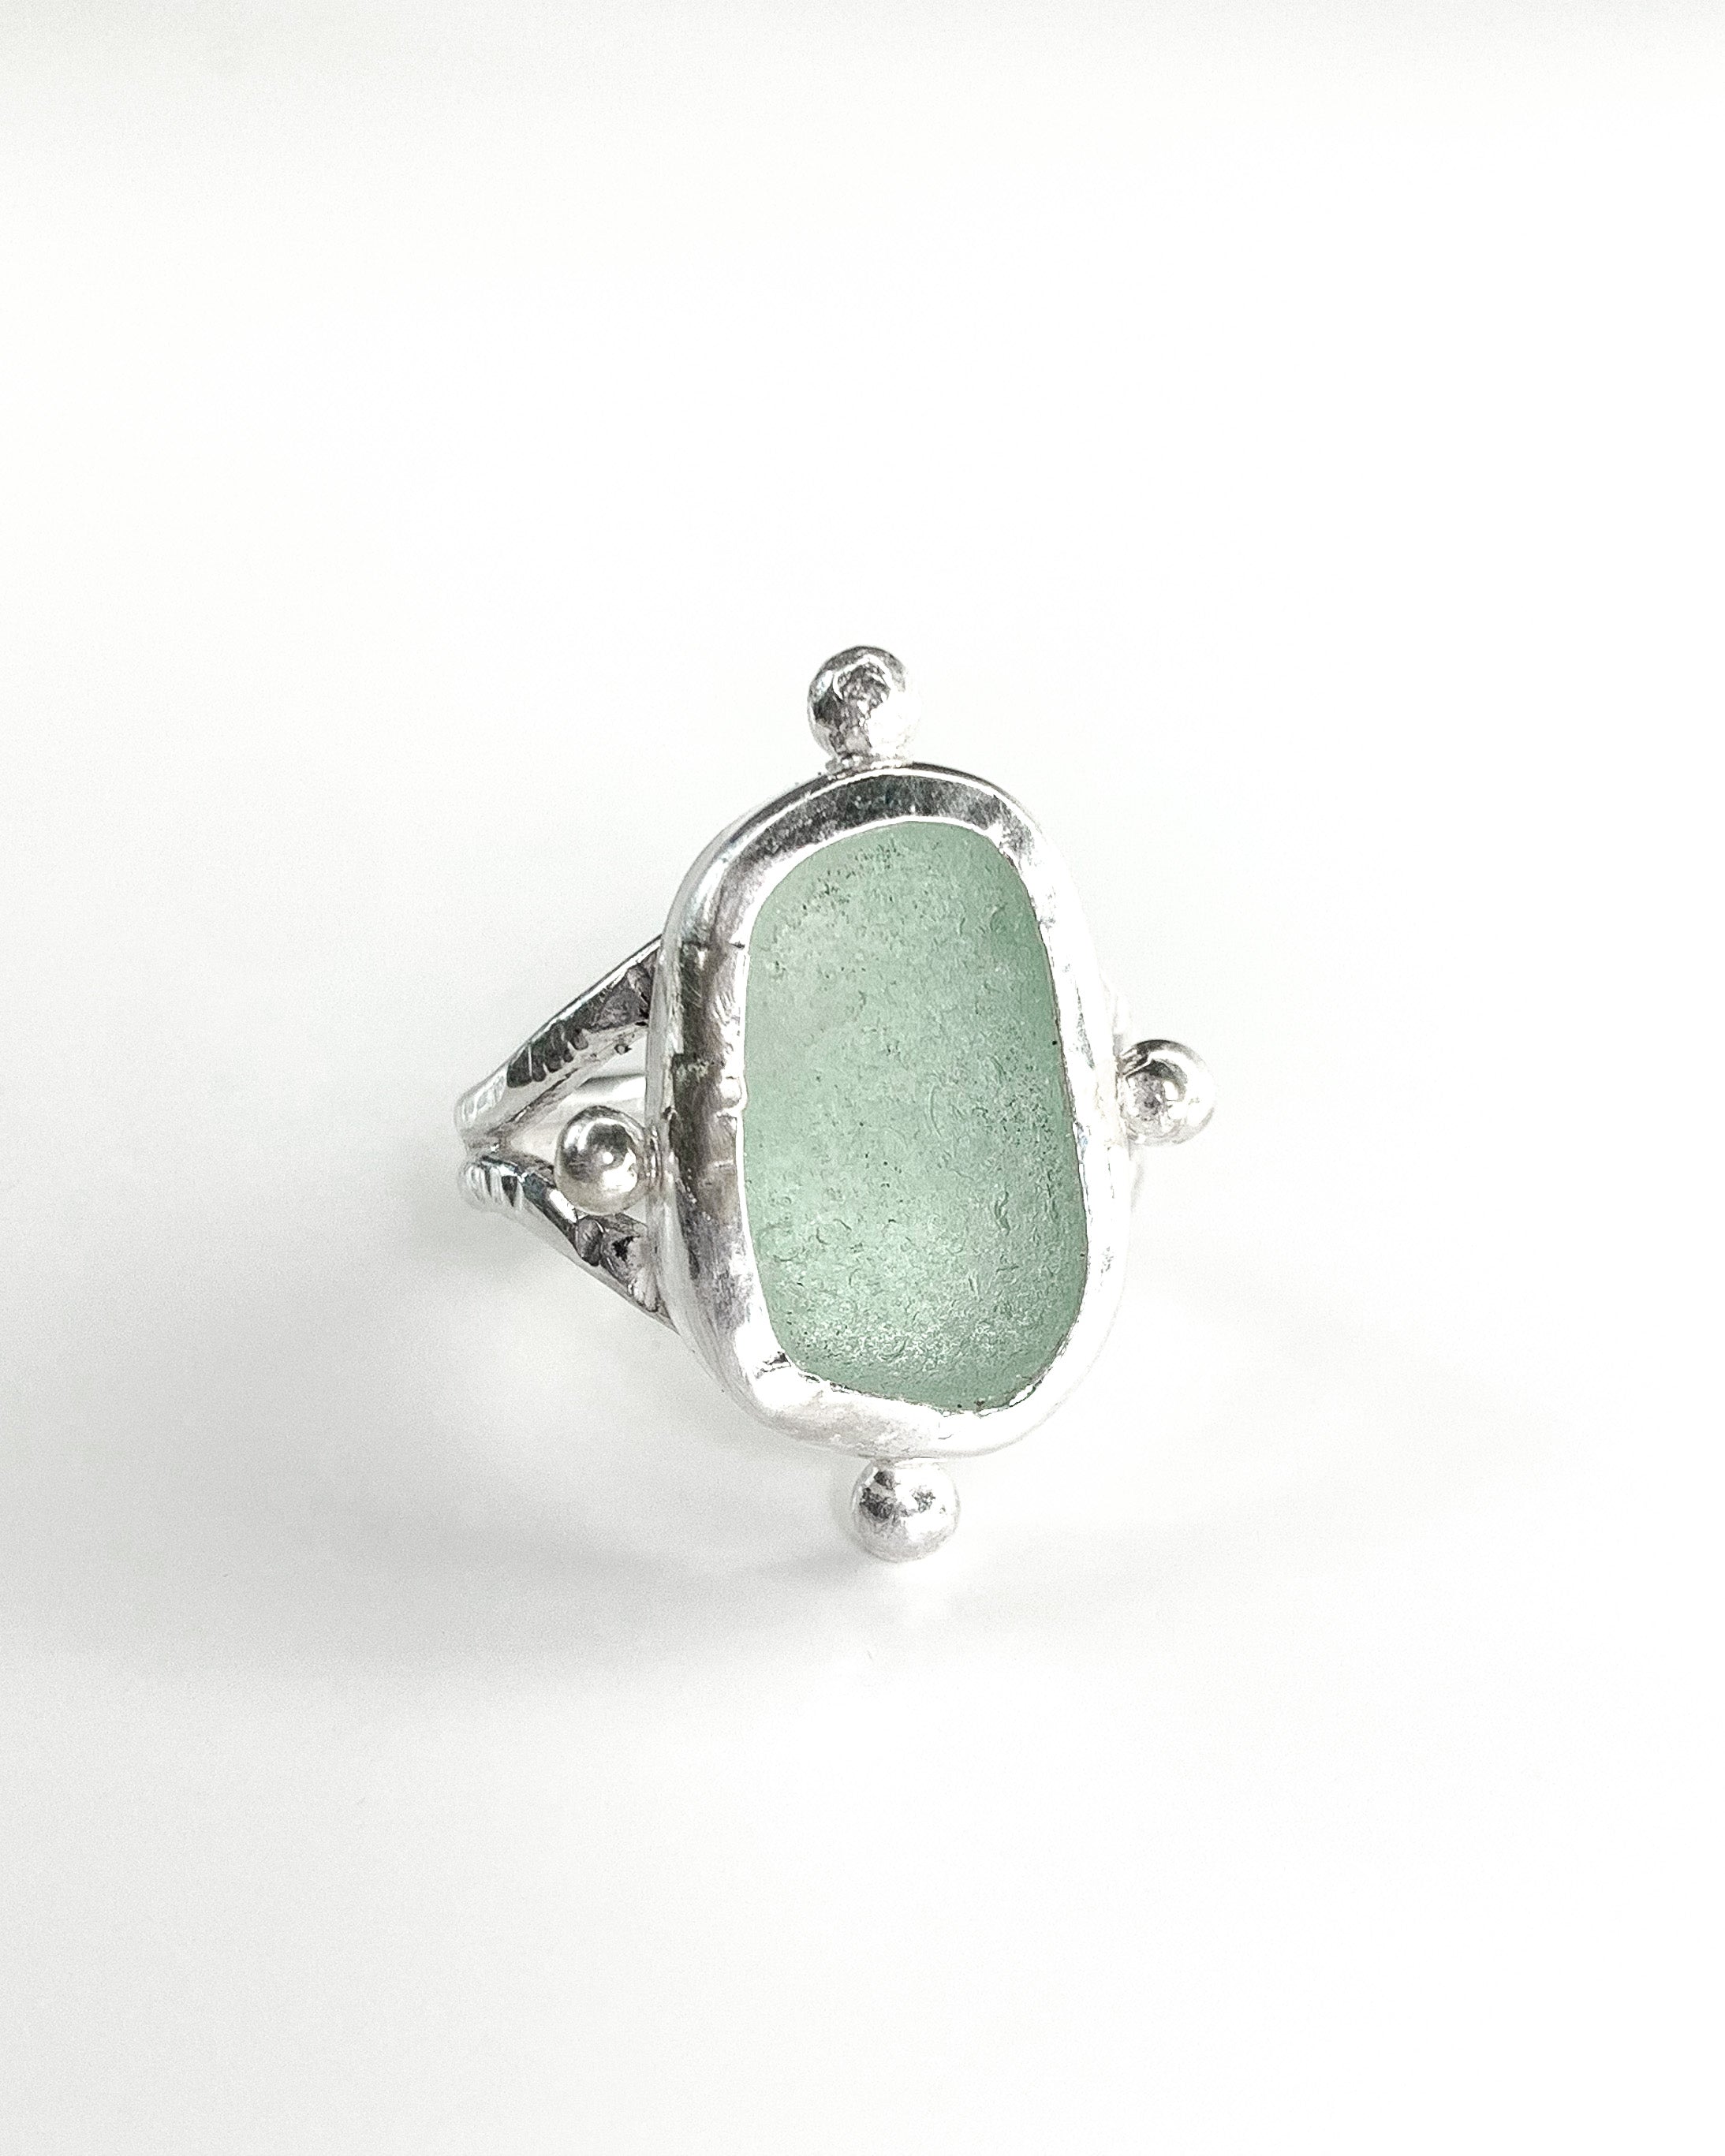 Beach glass ring - size 8